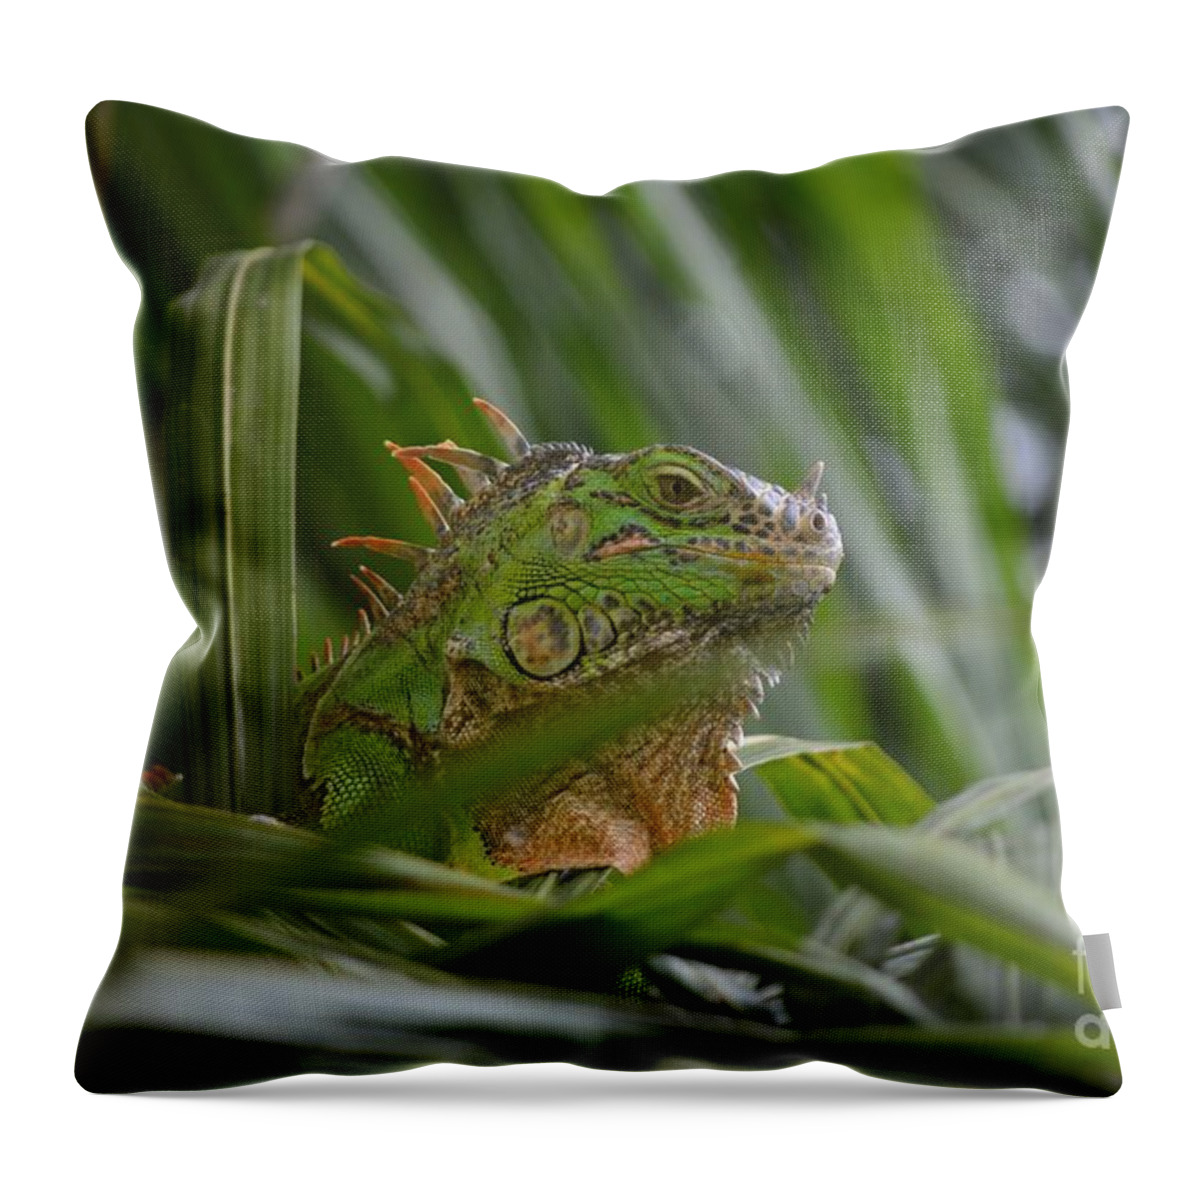 Animal Throw Pillow featuring the photograph Green Iguana Enjoying Life by Aicy Karbstein